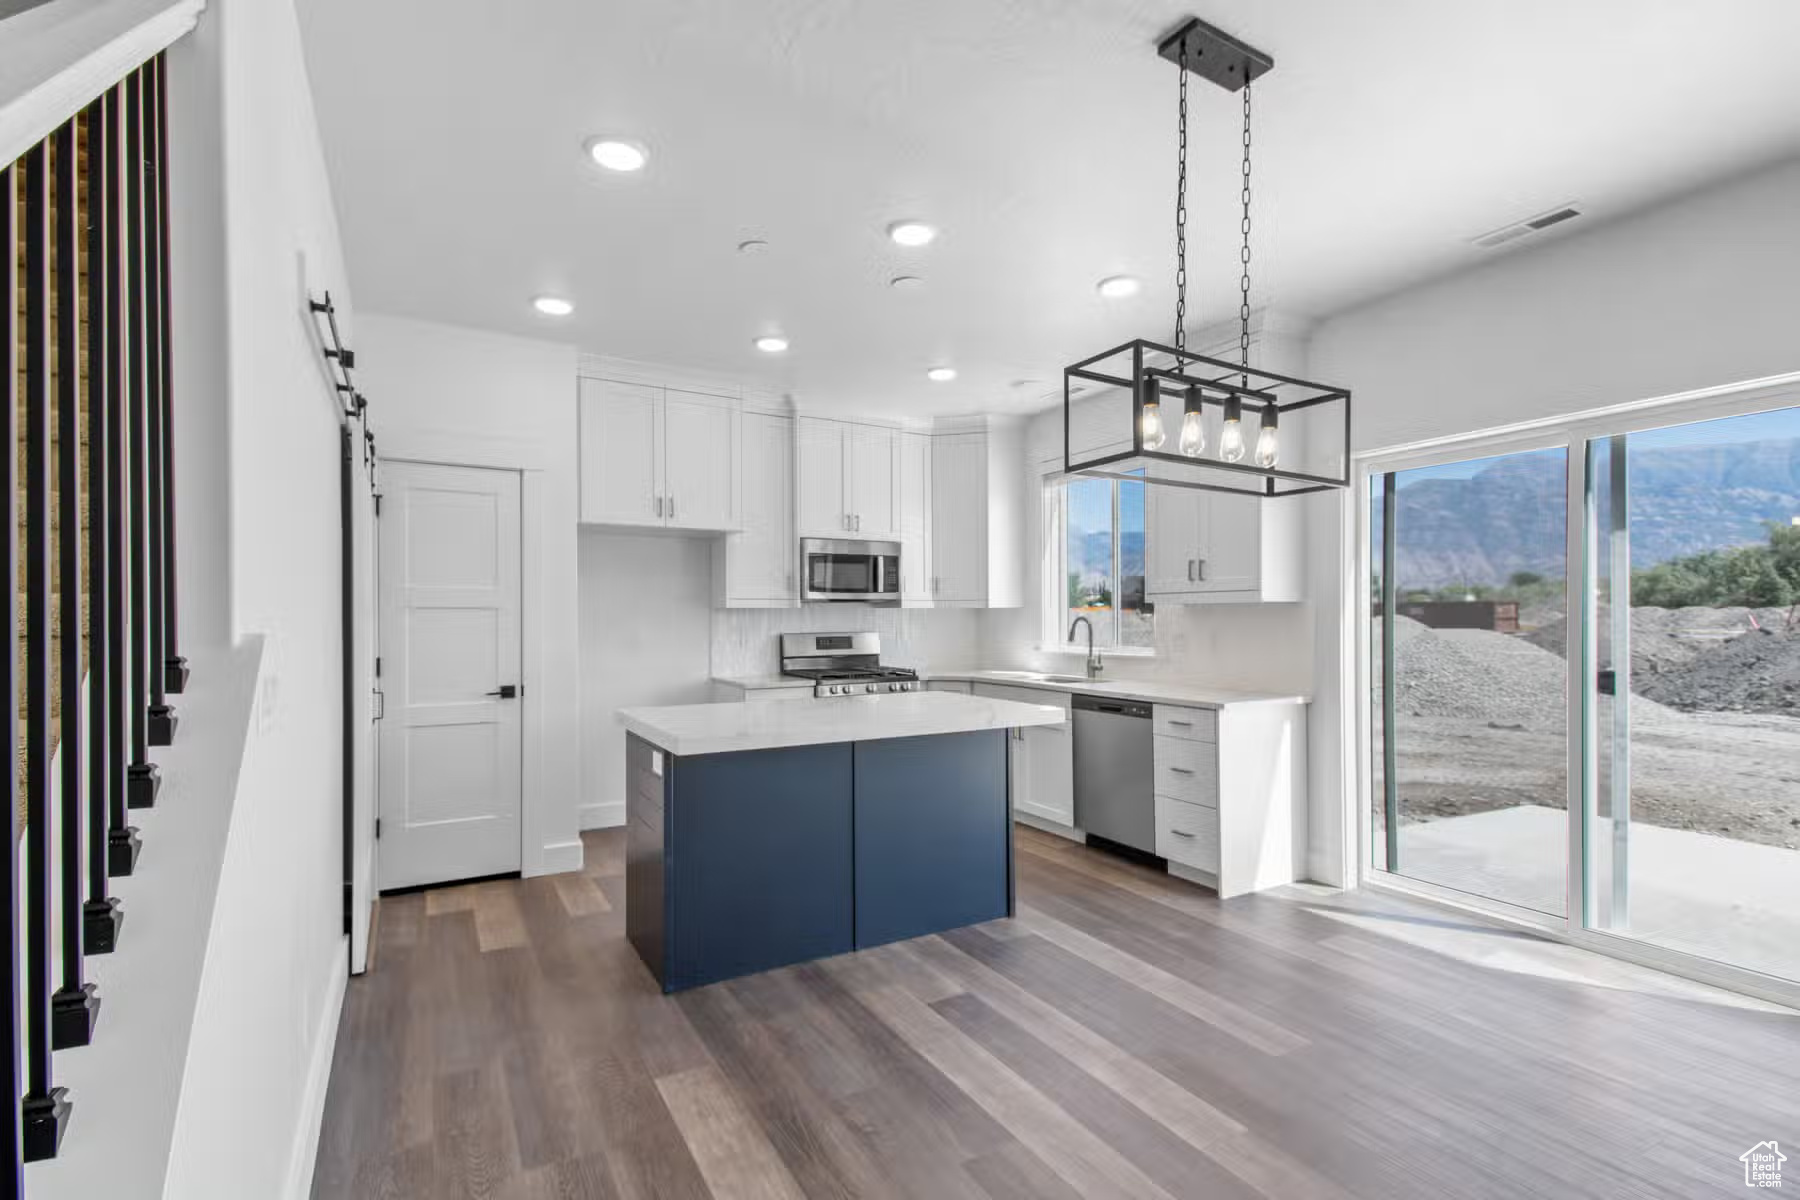 Kitchen with a center island, pendant lighting, white cabinetry, hardwood / wood-style floors, and stainless steel appliances